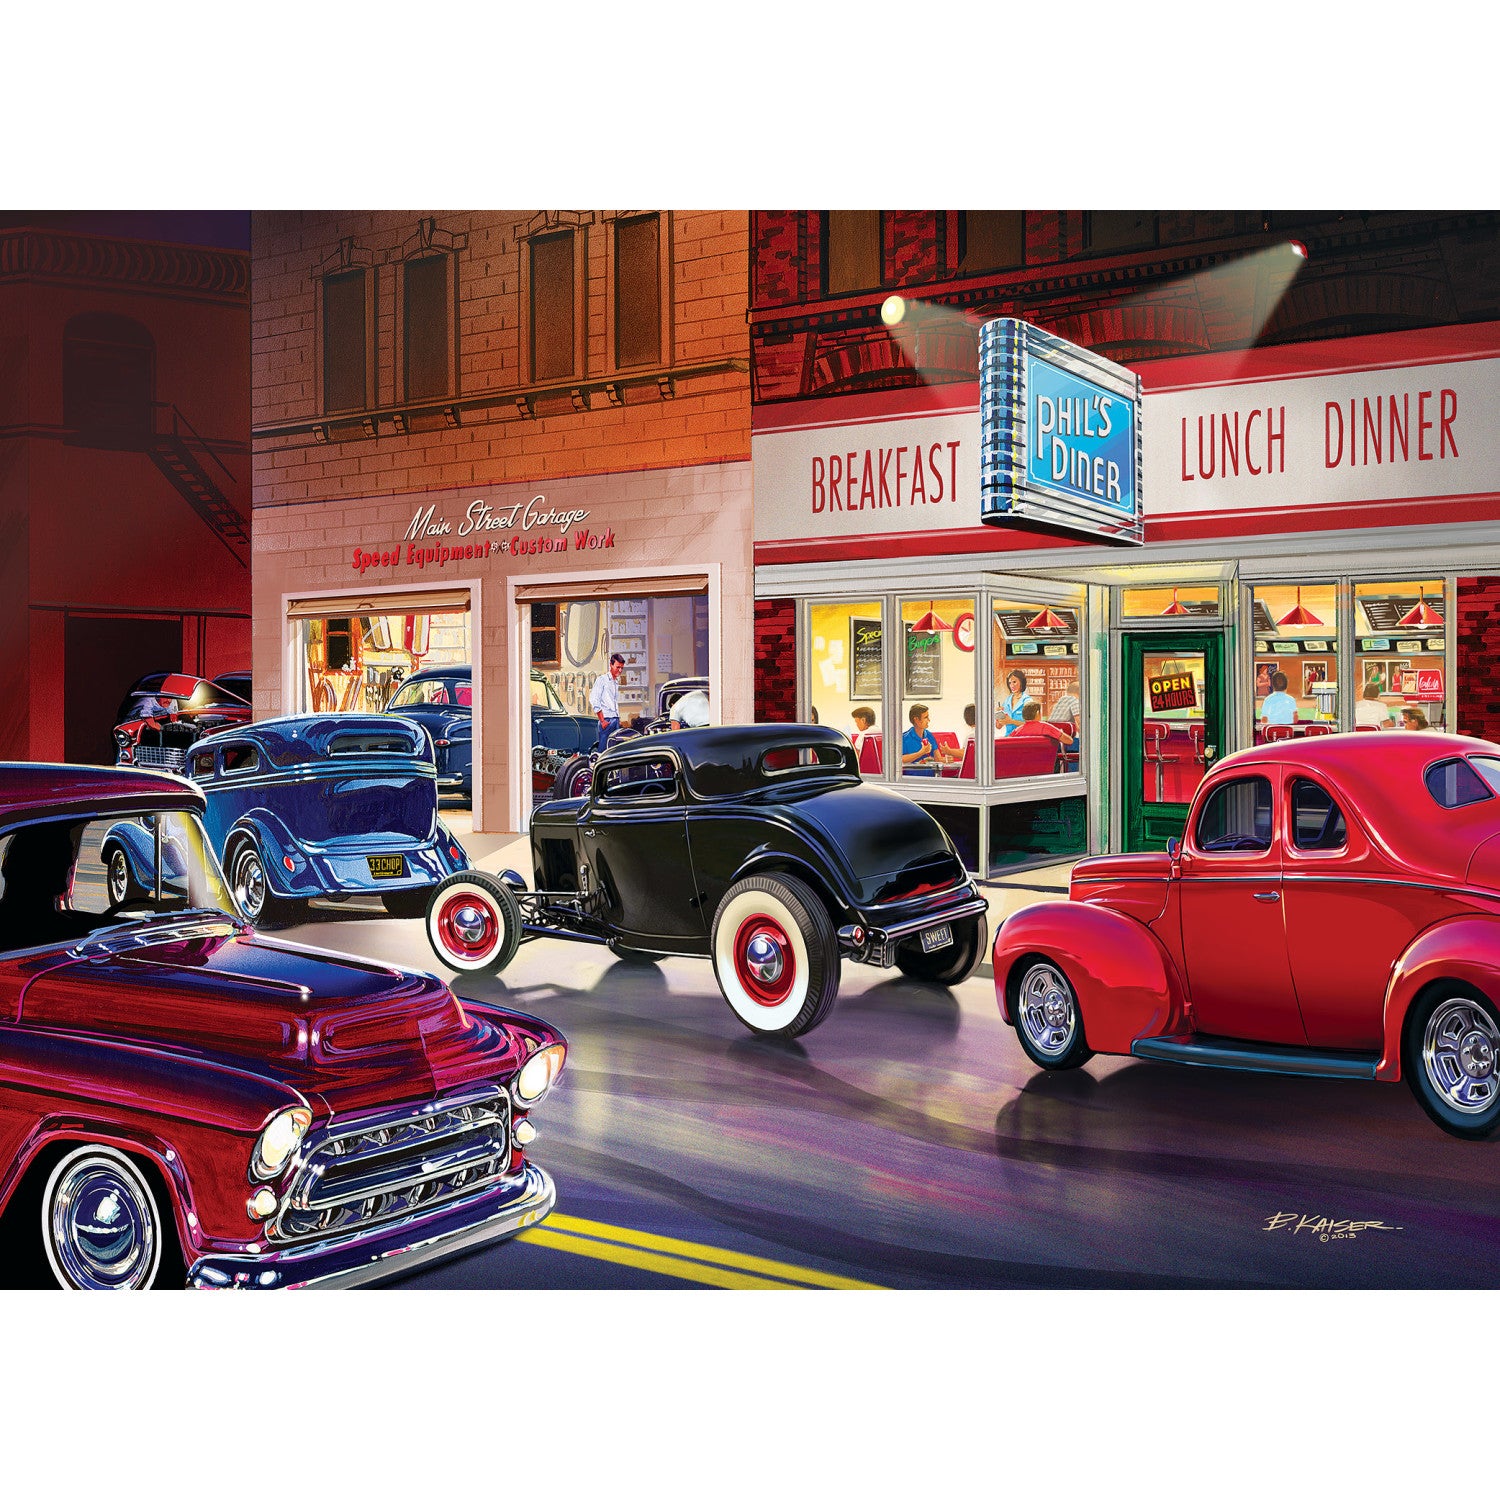 Masterpieces Puzzles Cruisin' Route 66 - Trading Post on Route 66 1000  Piece Puzzle